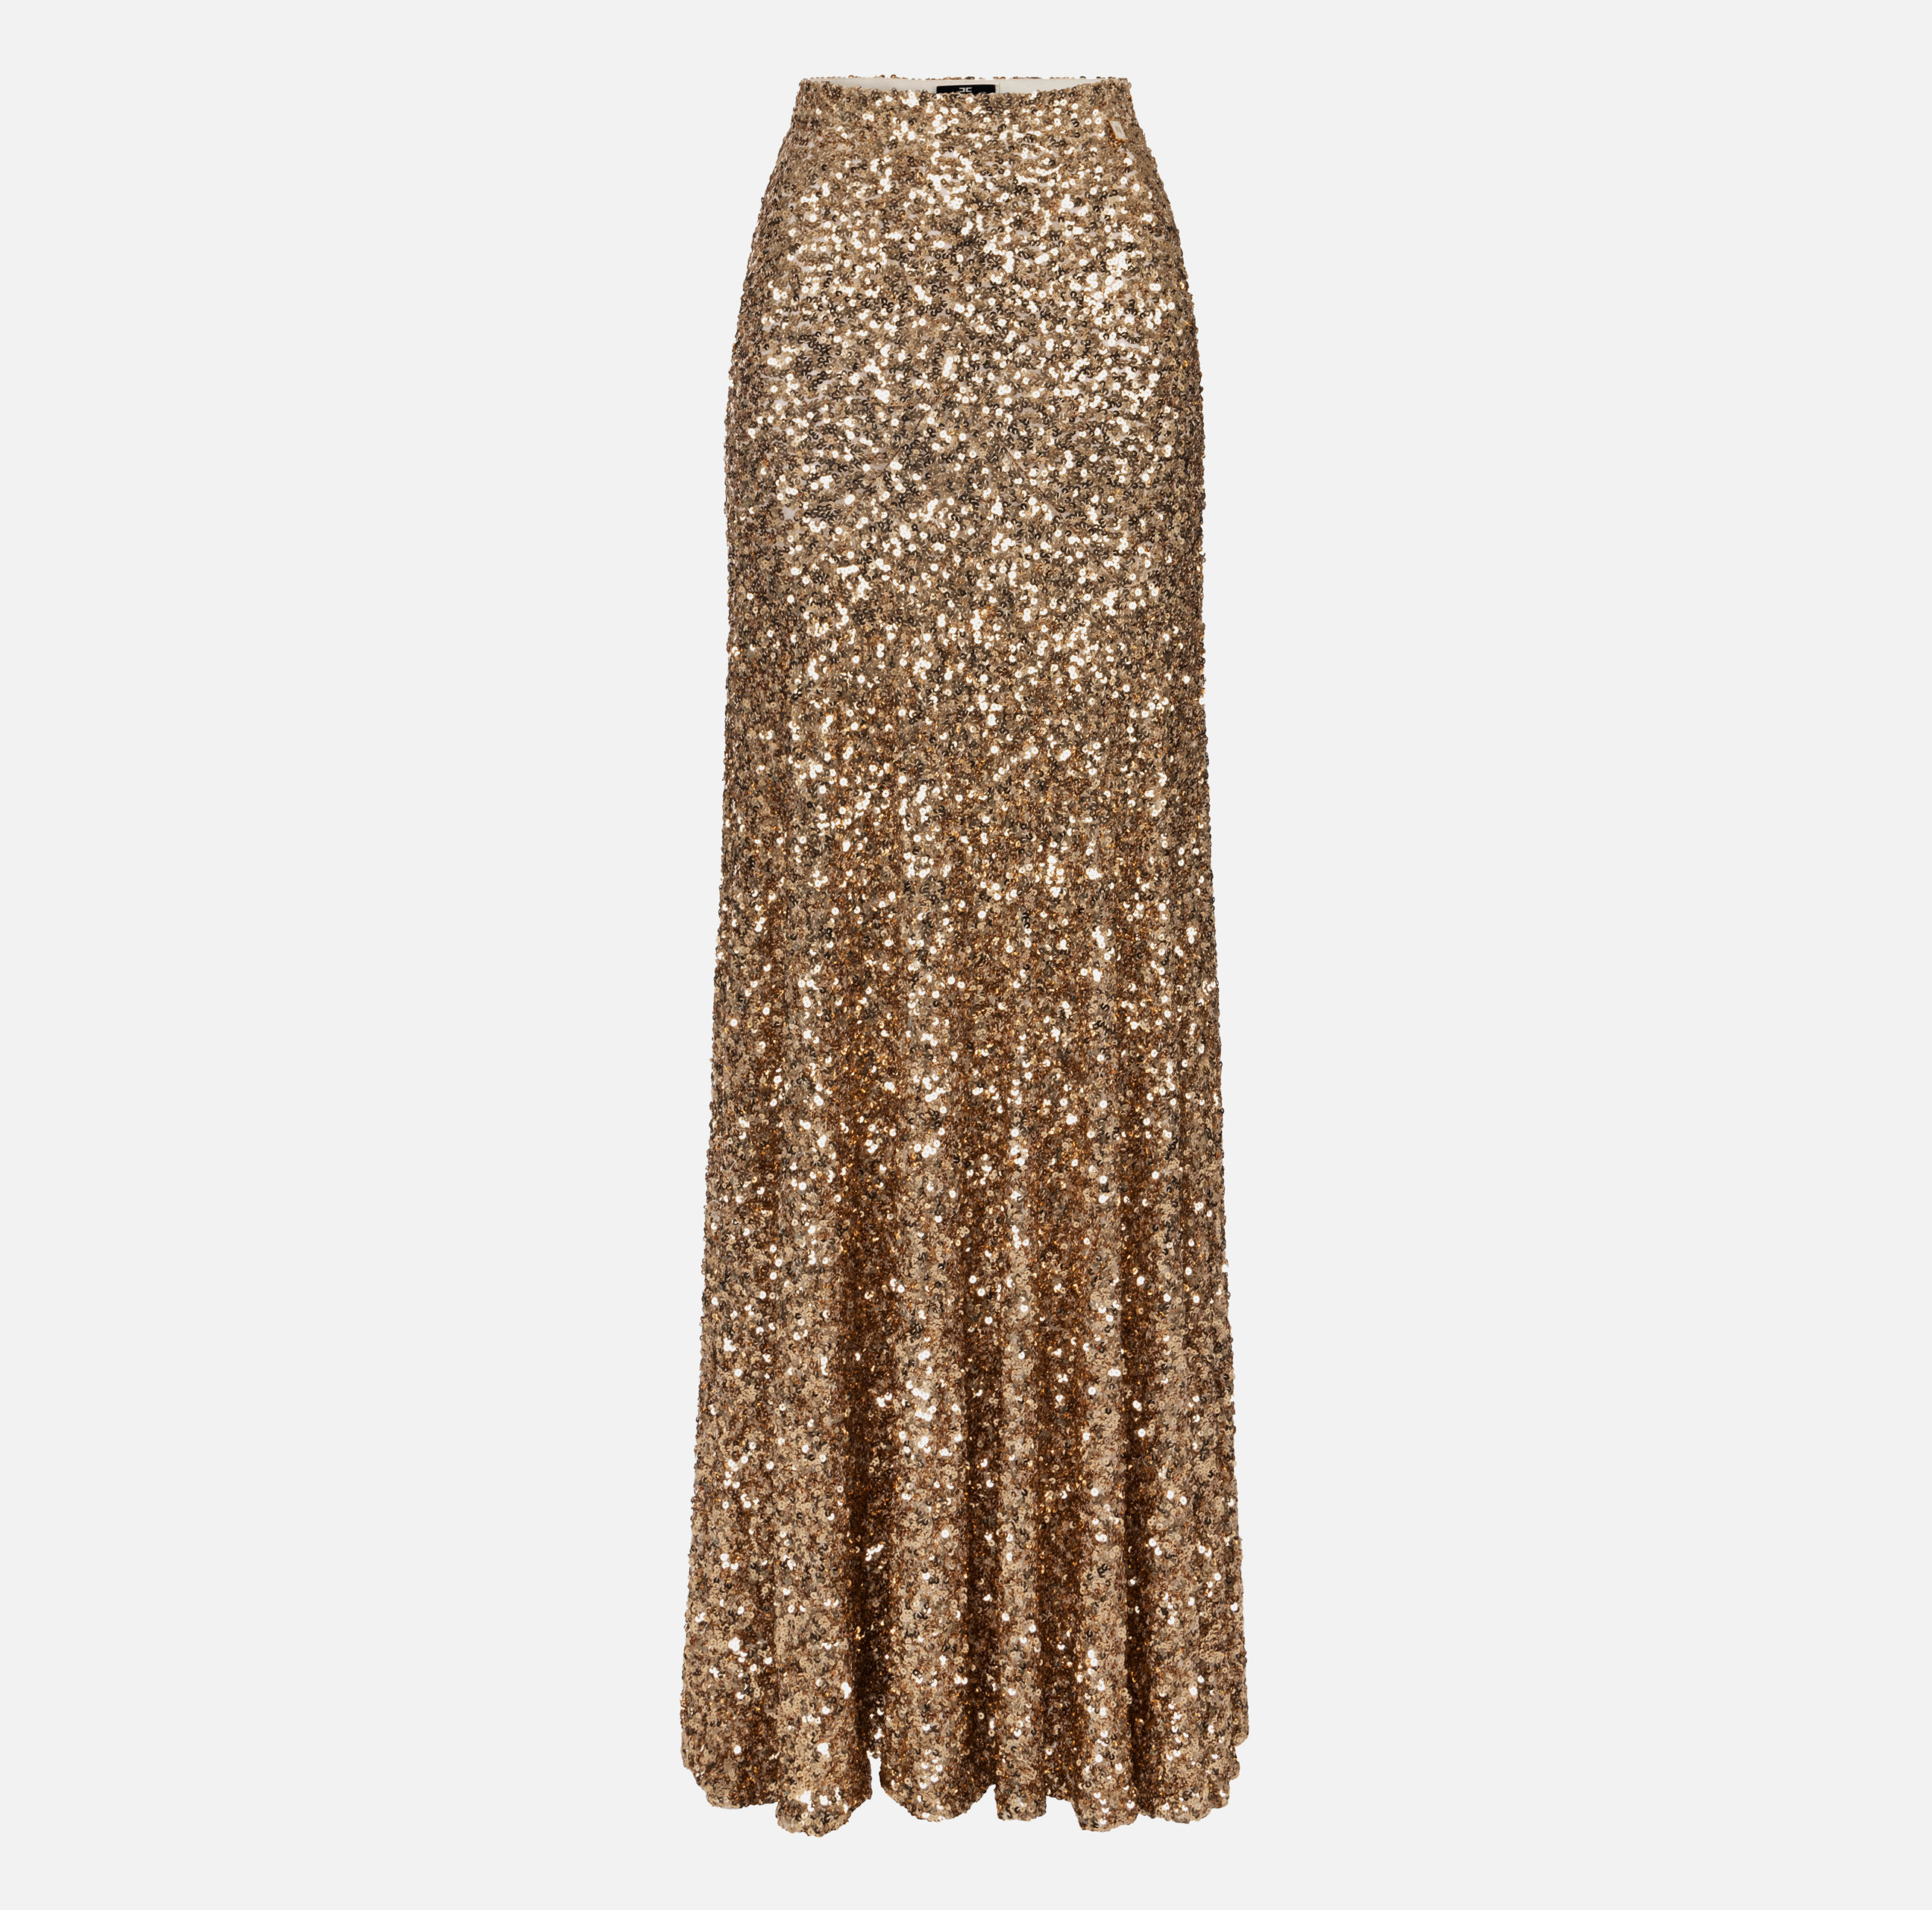 Long skirt in tulle fabric with sequins - ABBIGLIAMENTO - Elisabetta Franchi